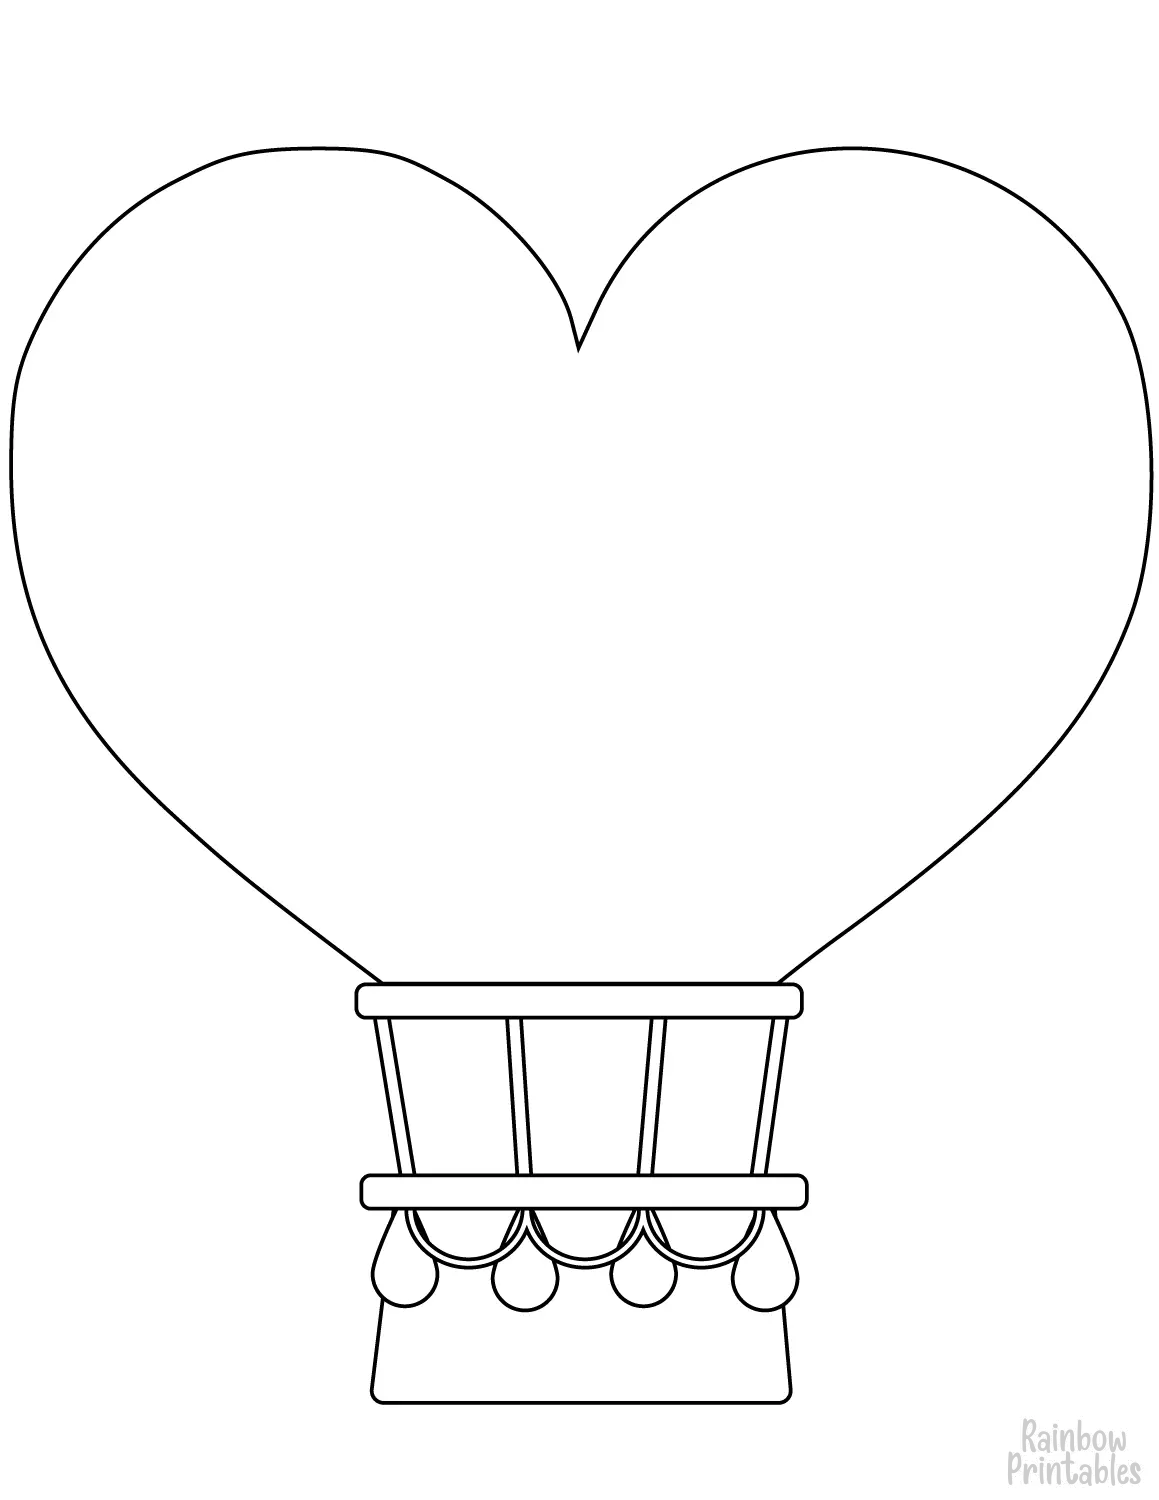 Valentine DAY HOT AIR BALLOON HEART SHAPE Clipart Coloring Pages for Kids Adults Art Activities Line Art-15